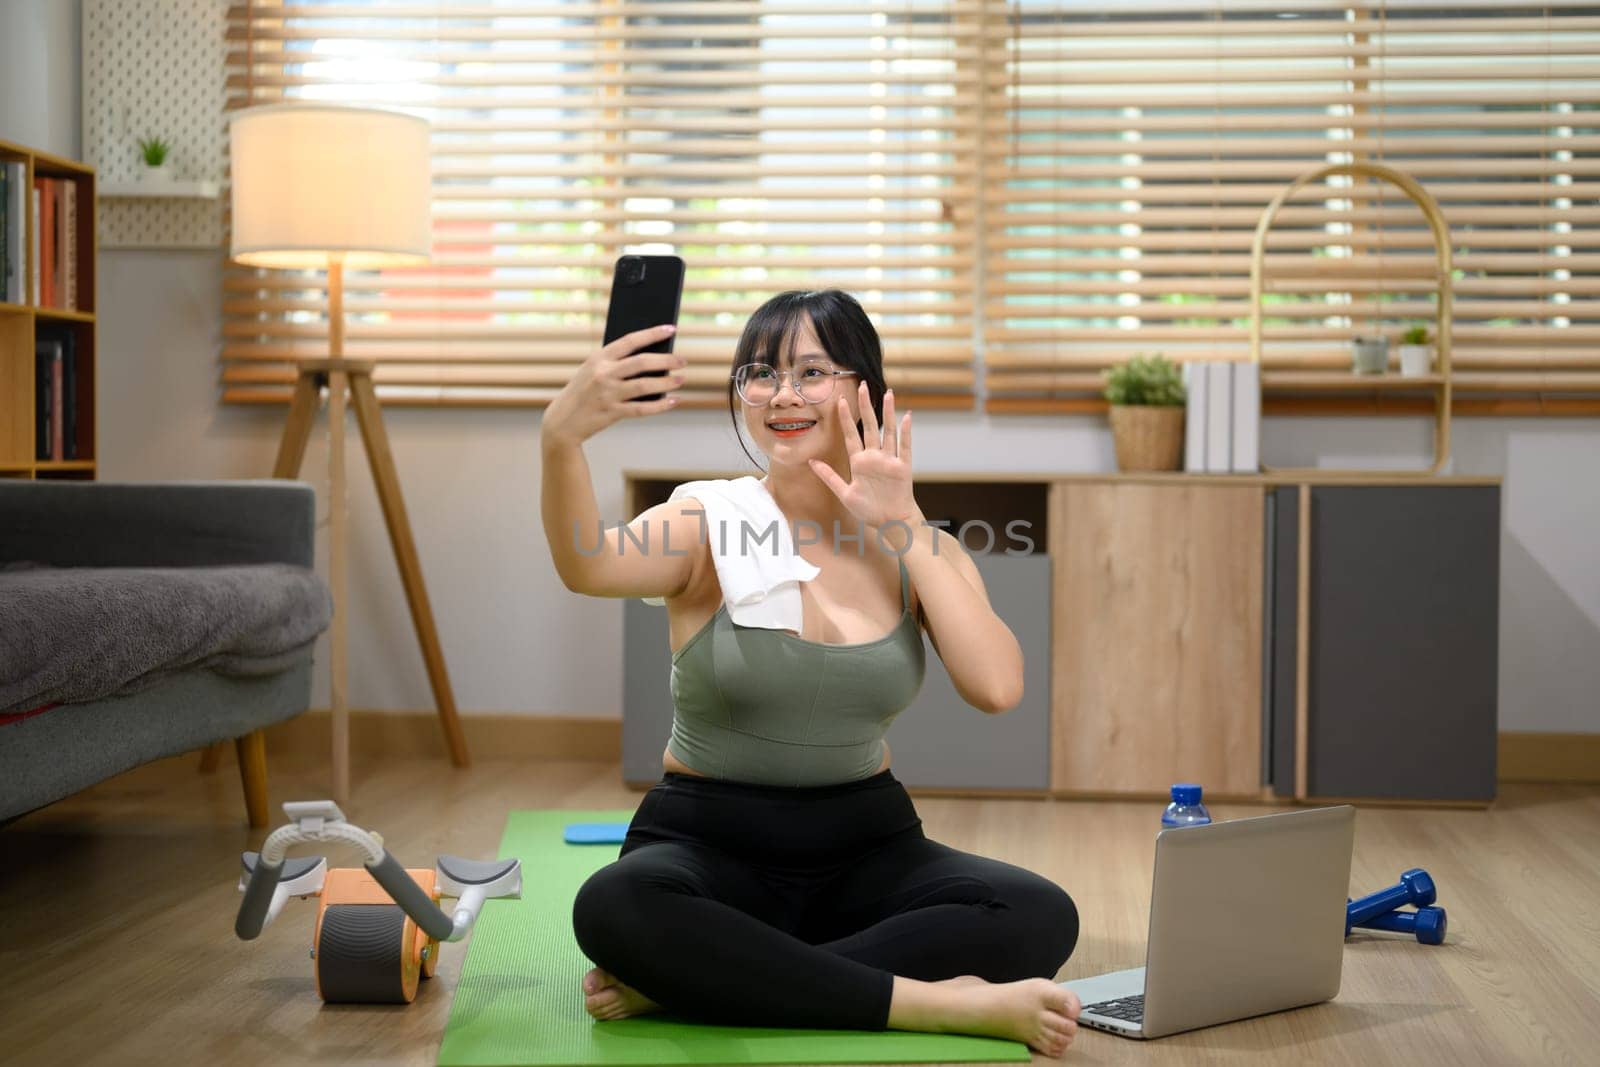 Pretty young woman sitting on exercise mat and making video call over mobile phone at home.